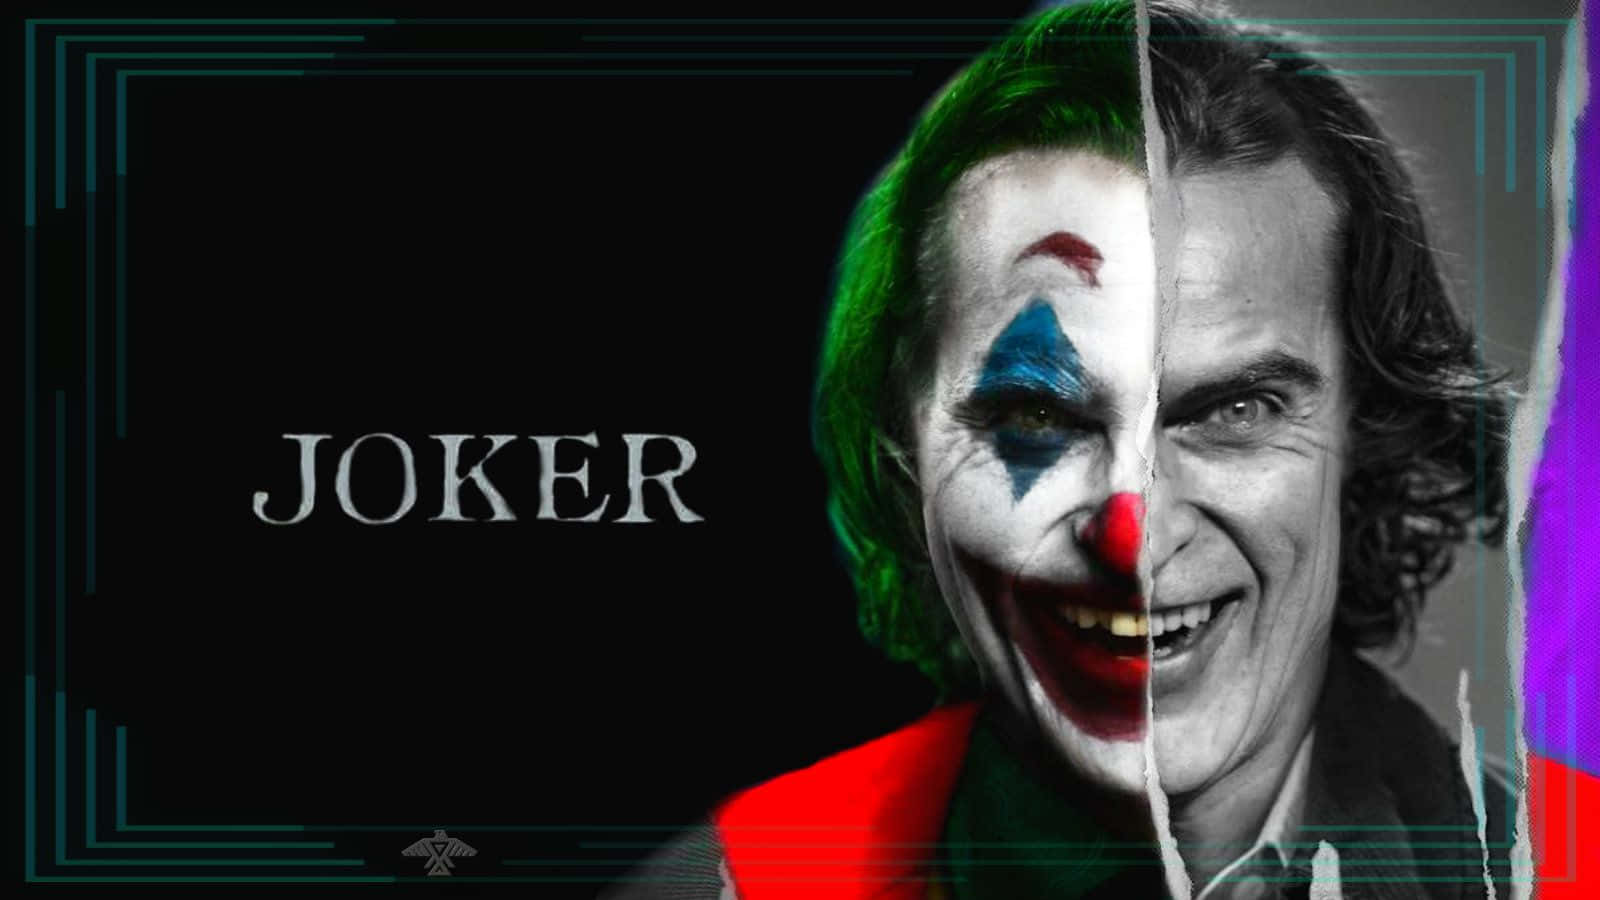 Enigmatic portrayal of Arthur Fleck in his iconic Joker makeup Wallpaper